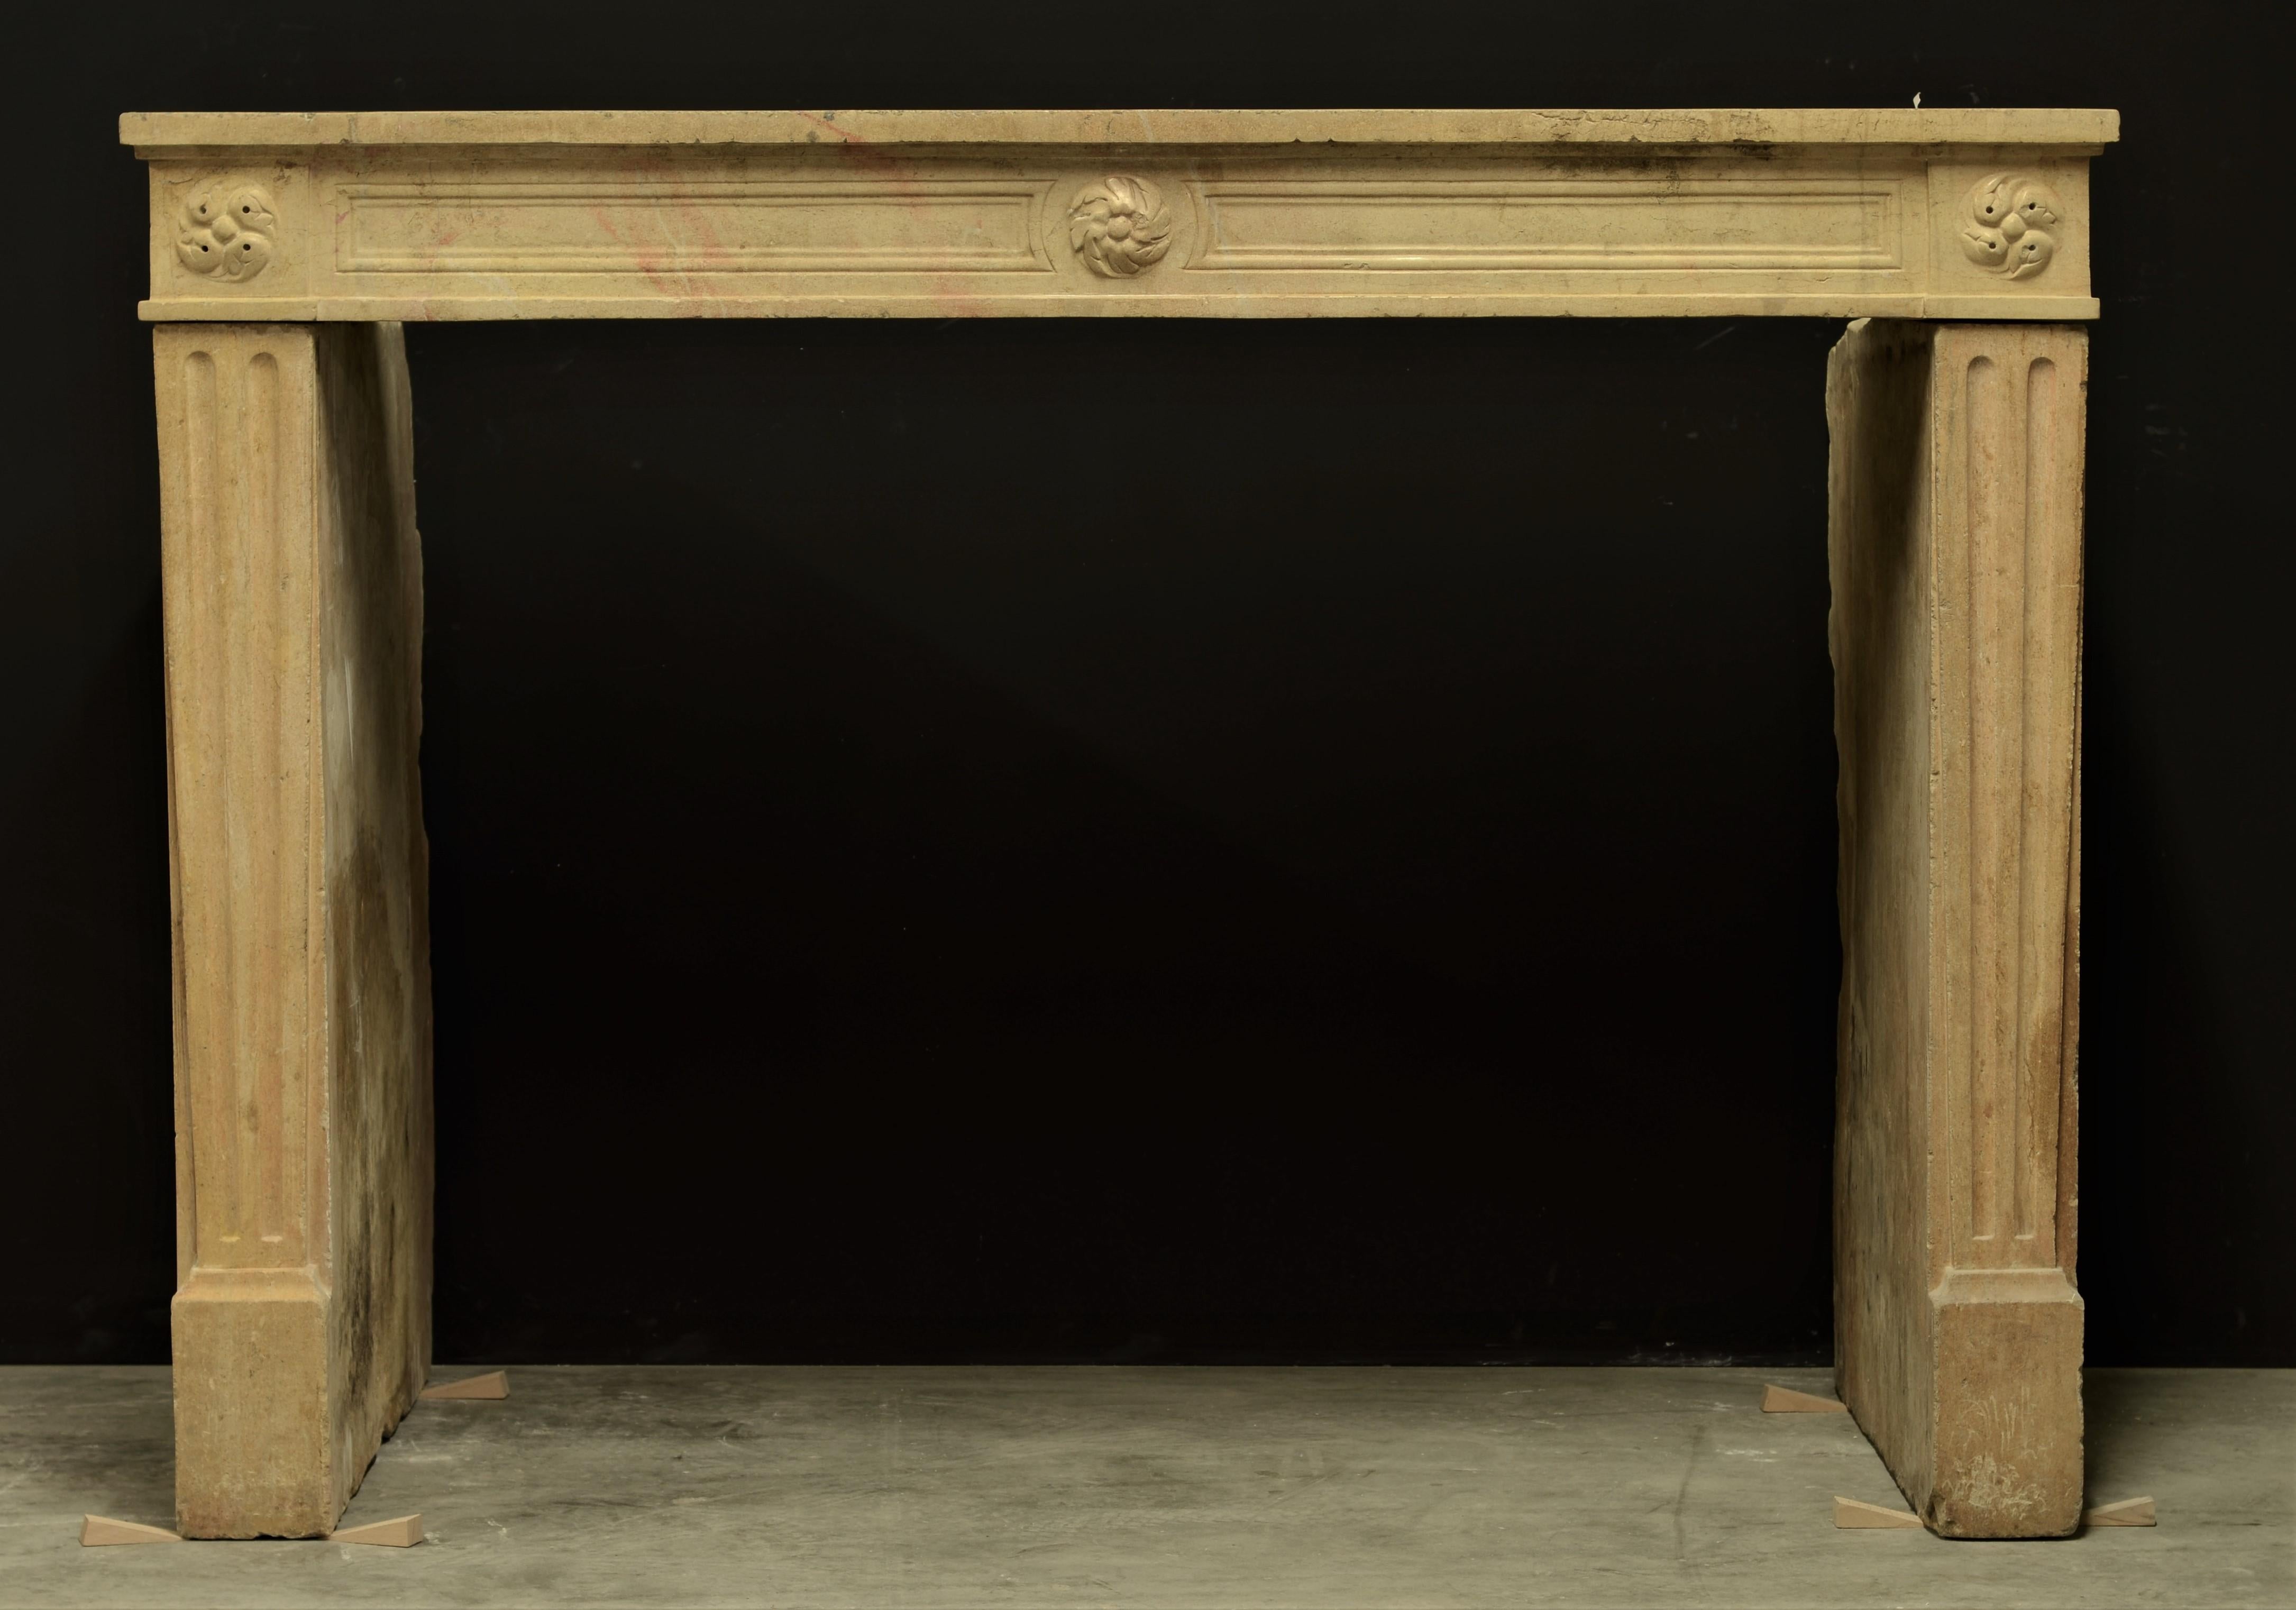 Antique French Fireplace Mantel in Limestone.
This soft toned Louis XVI mantel is nicely decorated, and would fit any interior.

It has some minor restorations.
Ready to be shipped and installed. 

Sold by Schermerhorn Antique Fireplaces